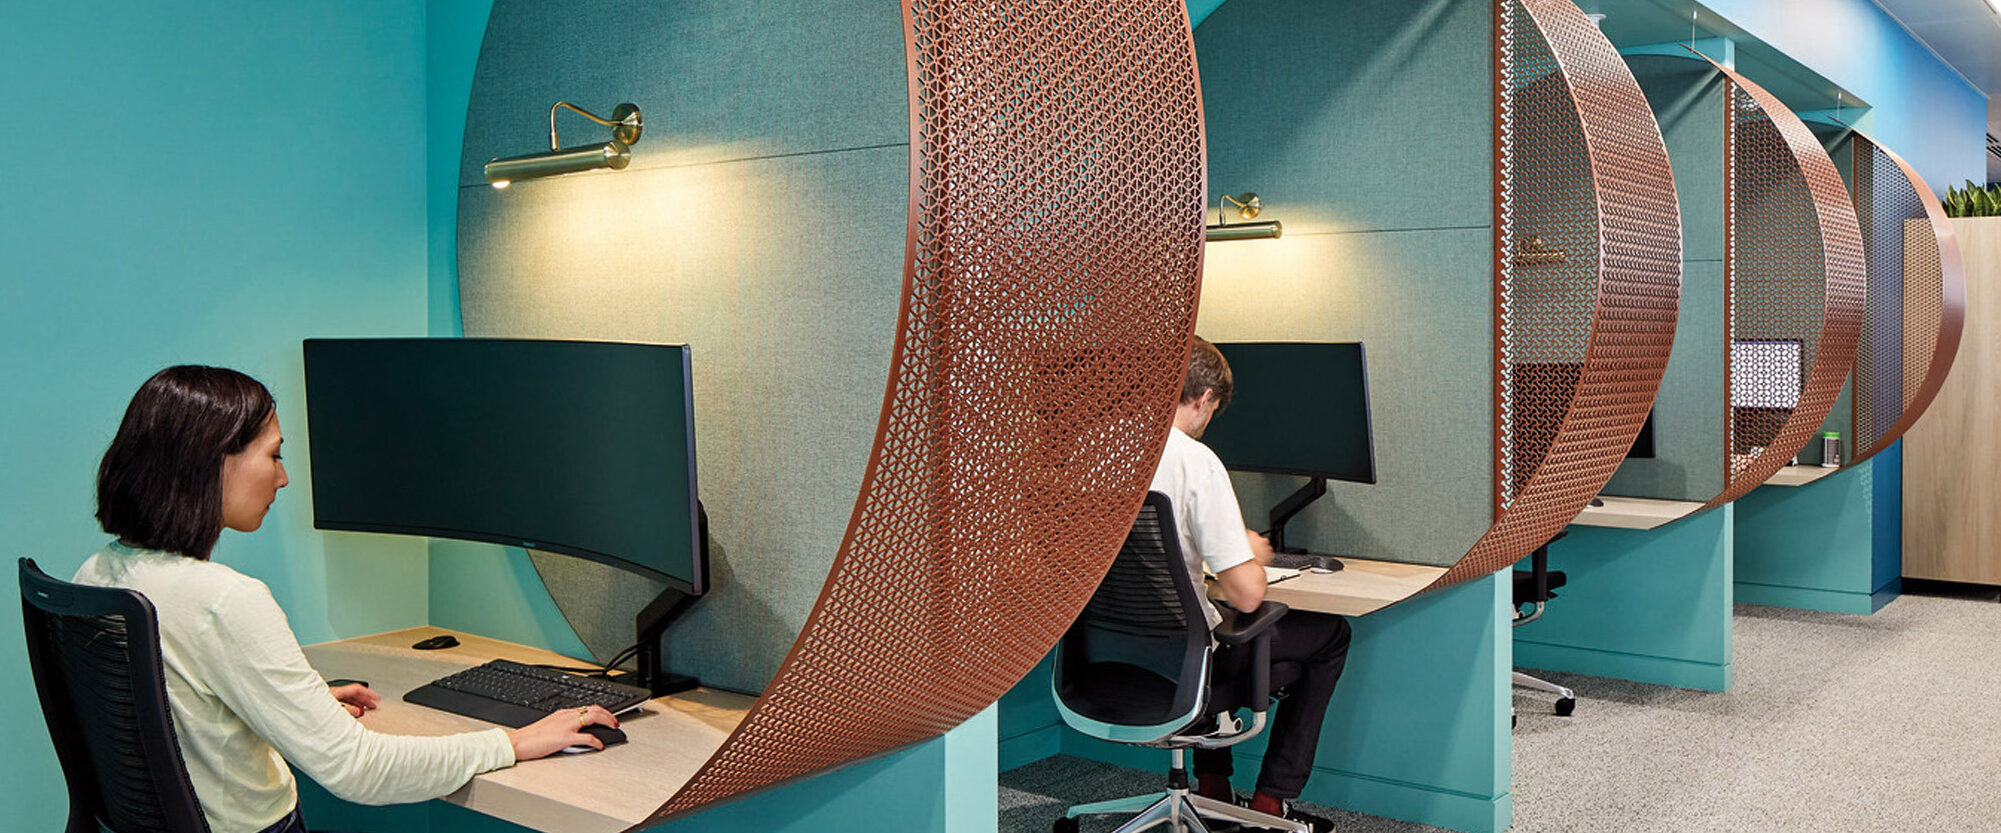 Modern open-plan office featuring turquoise cubicle partitions with curved, copper-finished privacy screens. Ergonomic black office chairs and wooden storage cabinets punctuate the space, showcasing a blend of functionality and contemporary design aesthetics.